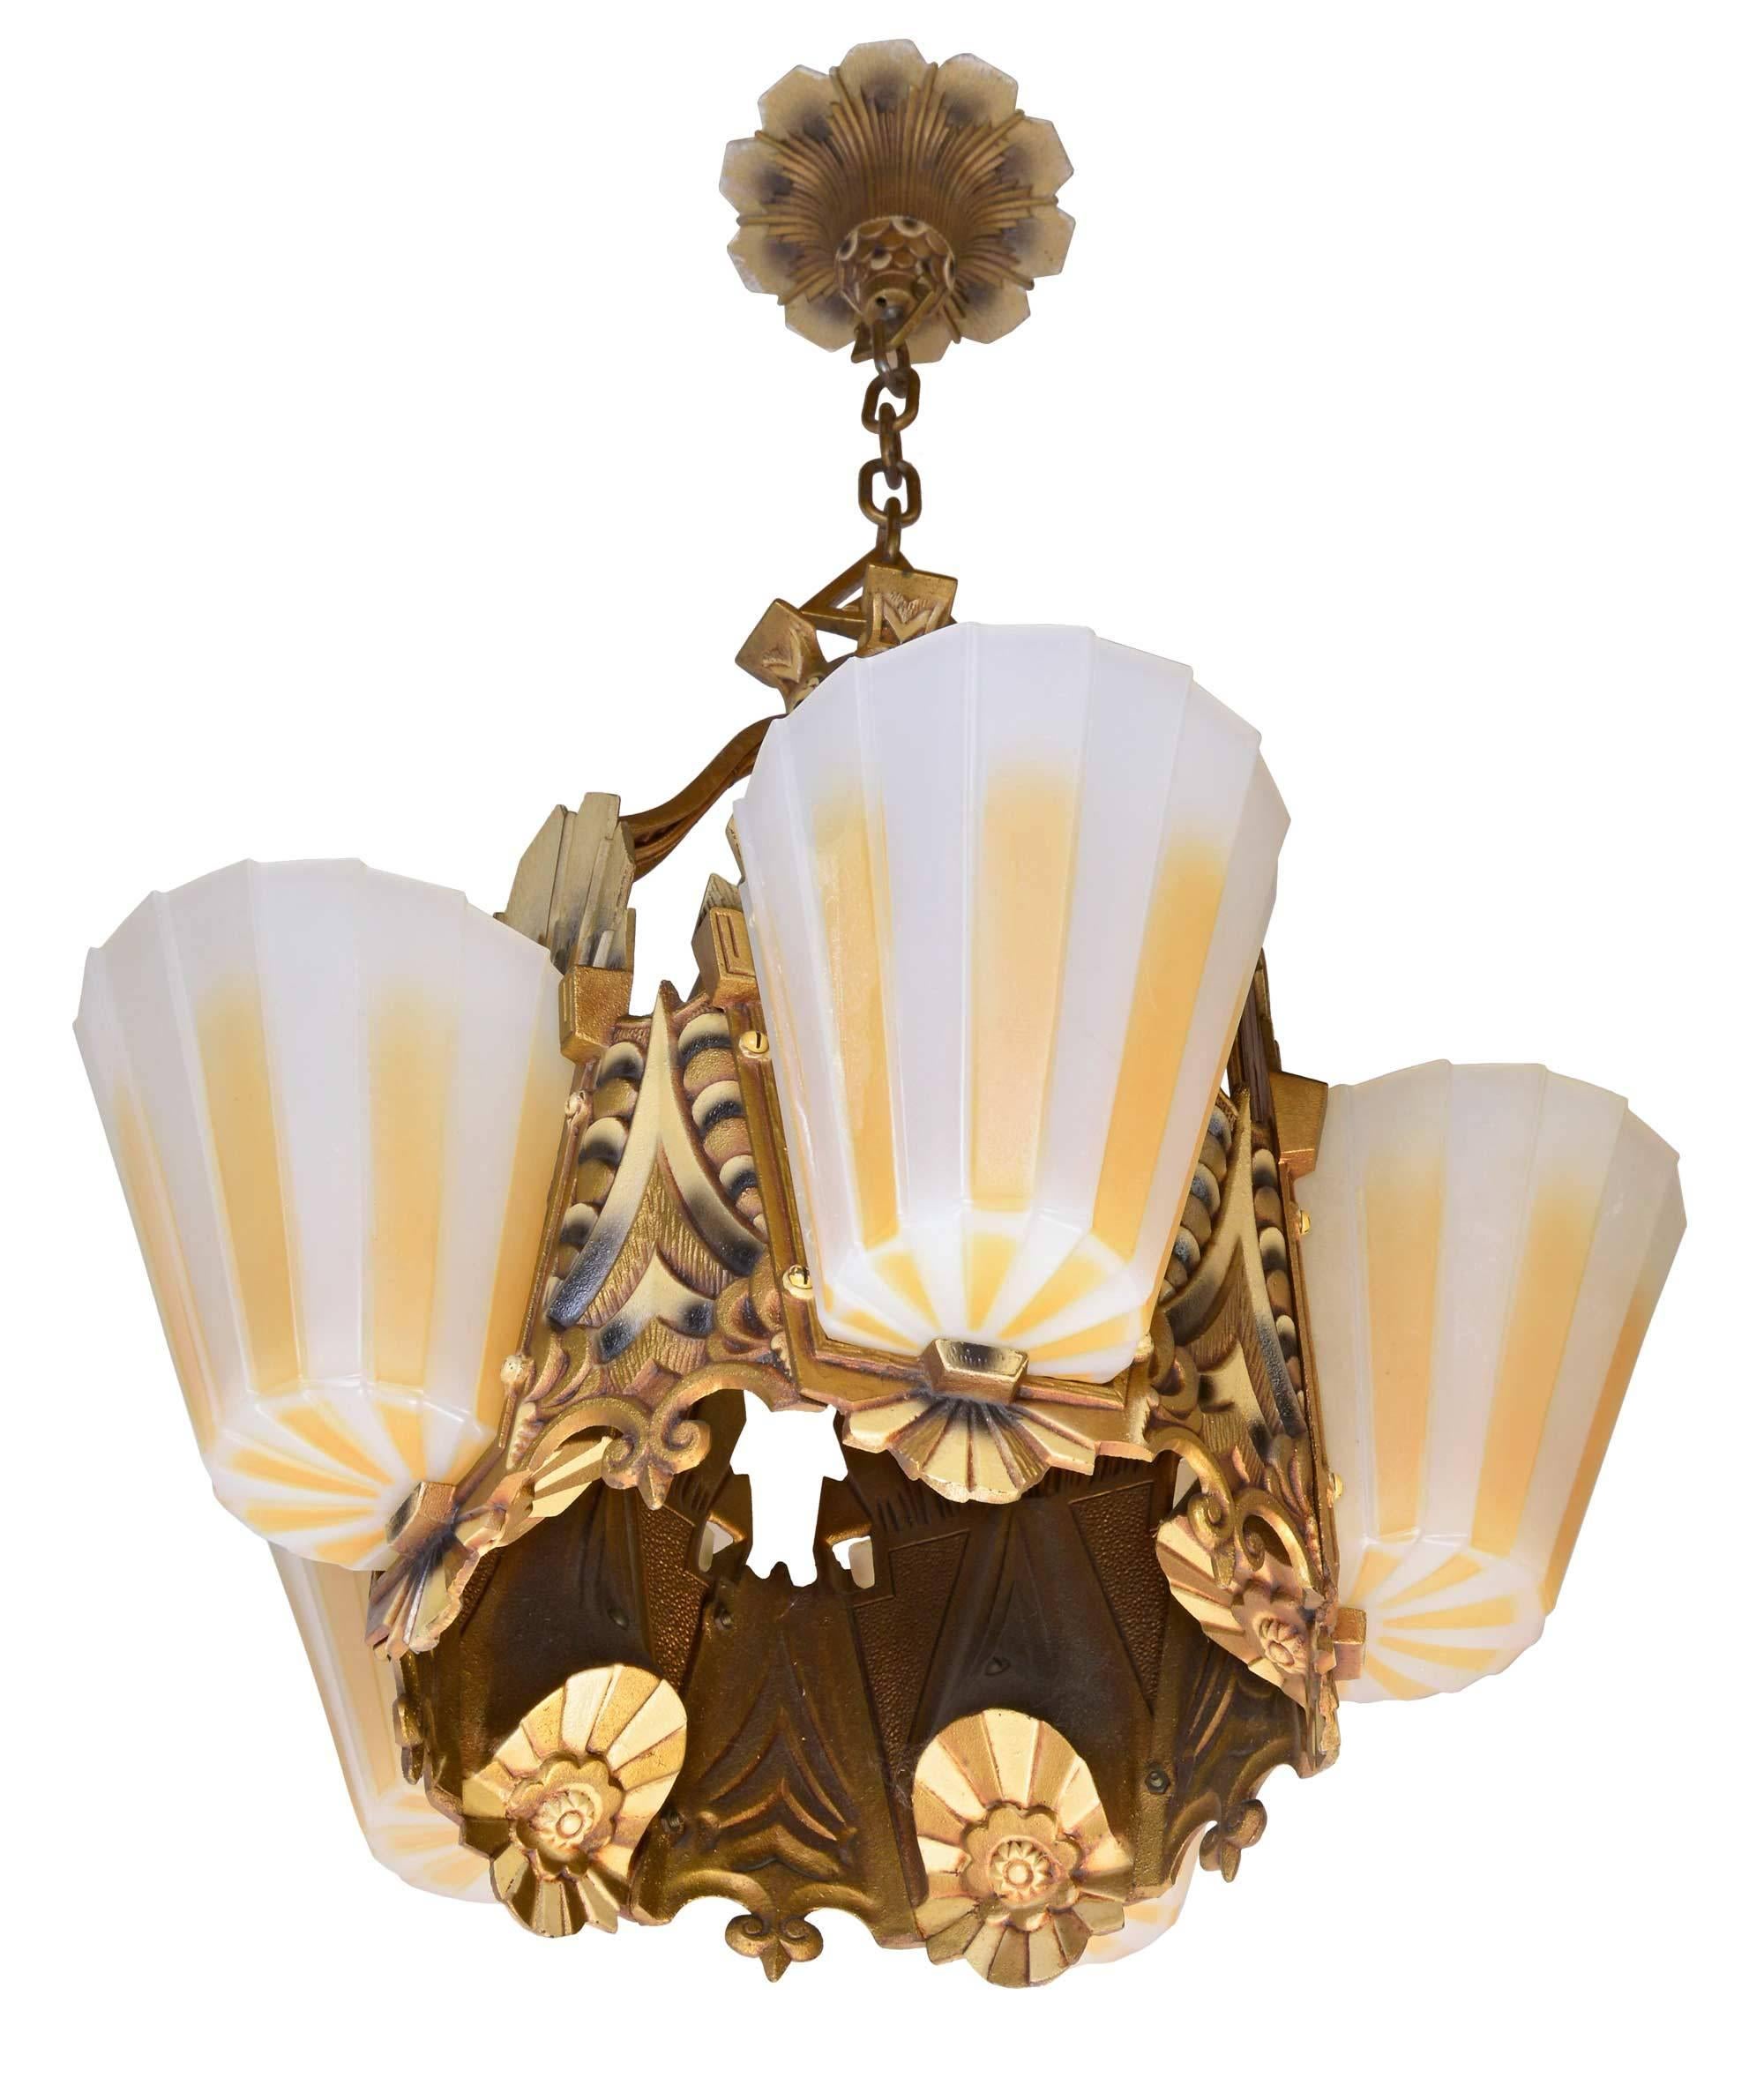 Iron five-light Williamson/Beardslee Art Deco chandelier with original polychrome finish and five striped slipper shades, by Williamson/Beardslee Manufacturing Co. of Chicago, IL. 

We find that early antique lighting was designed as objects of